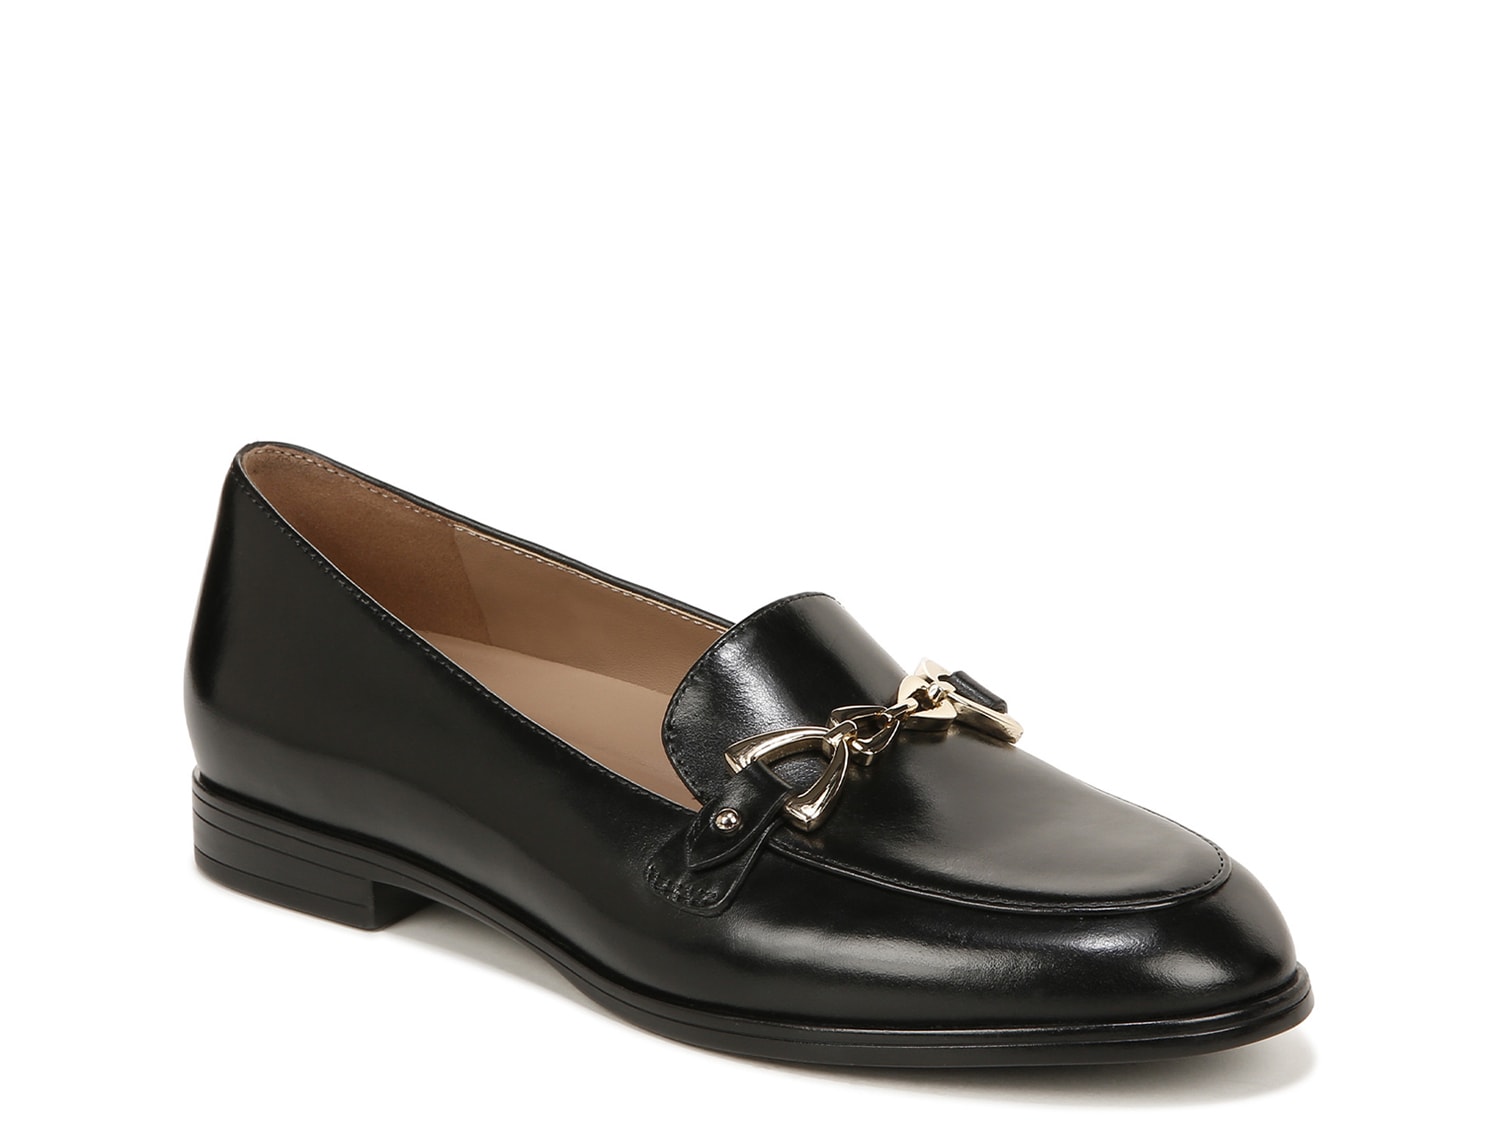 Naturalizer Gala Loafer - Free Shipping | DSW